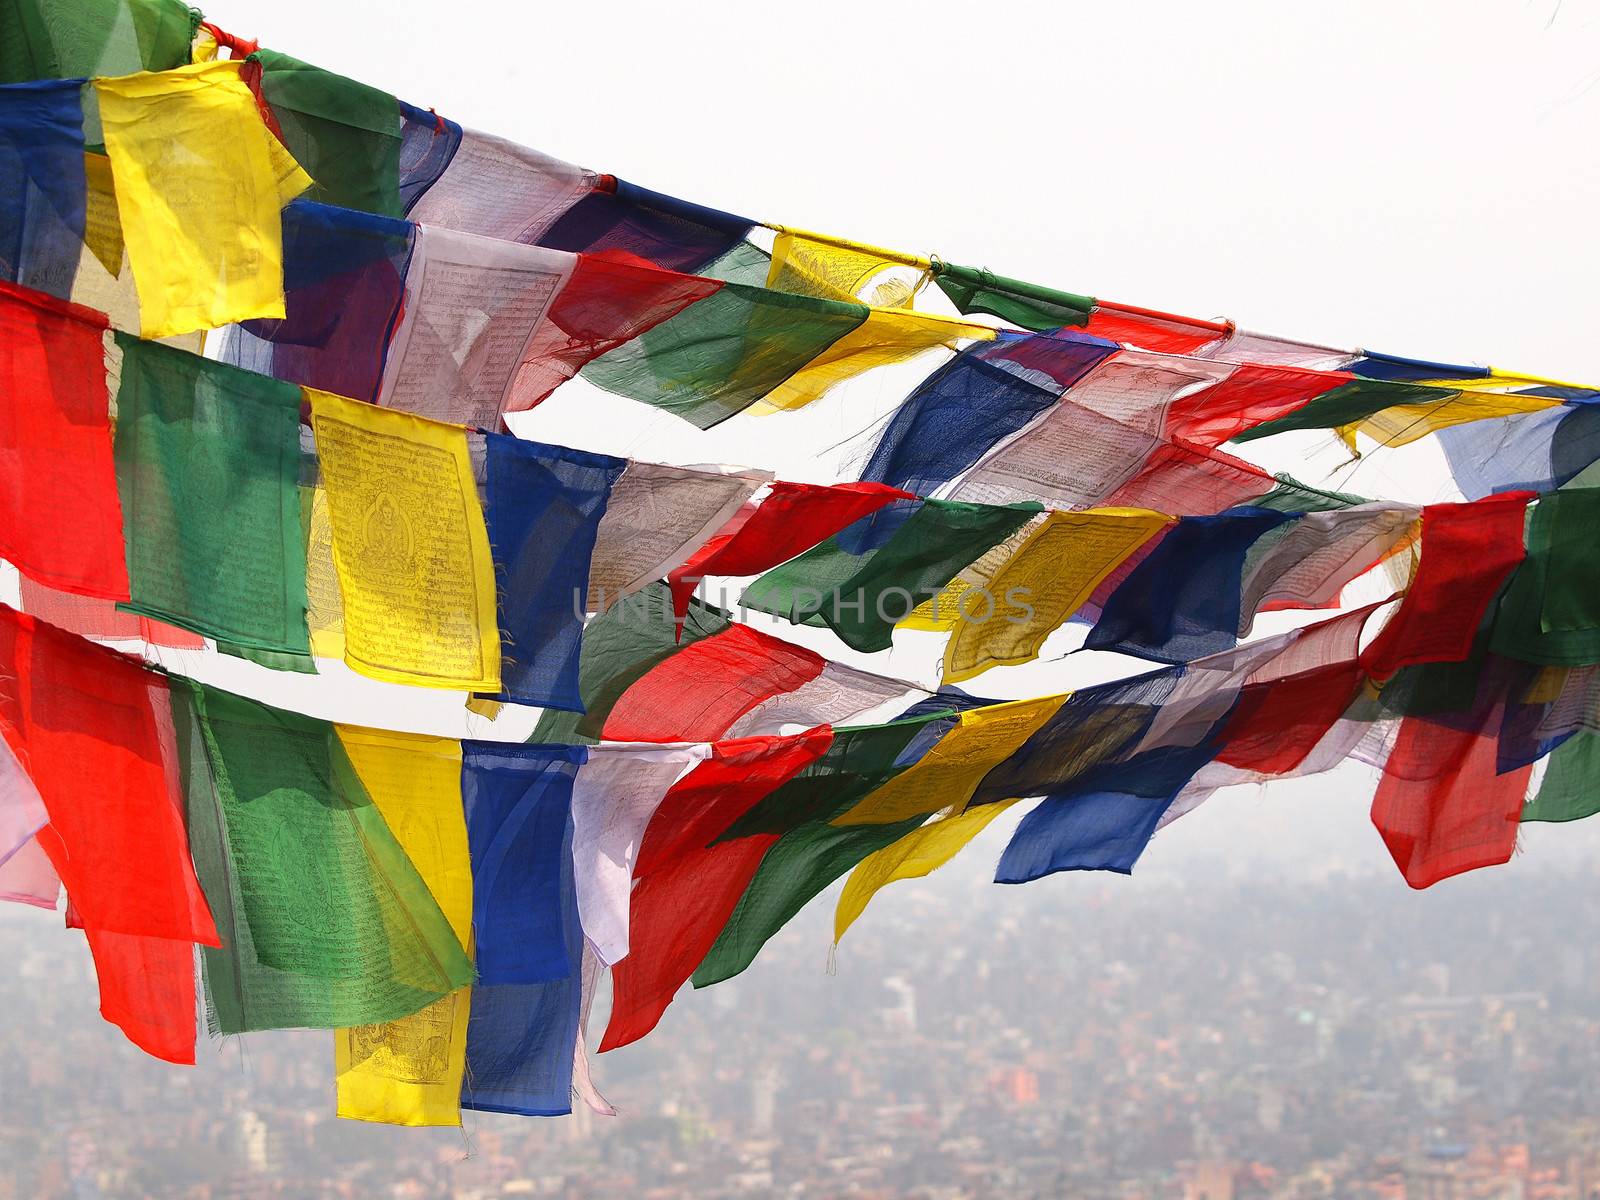 flags in Nepal by nevenm